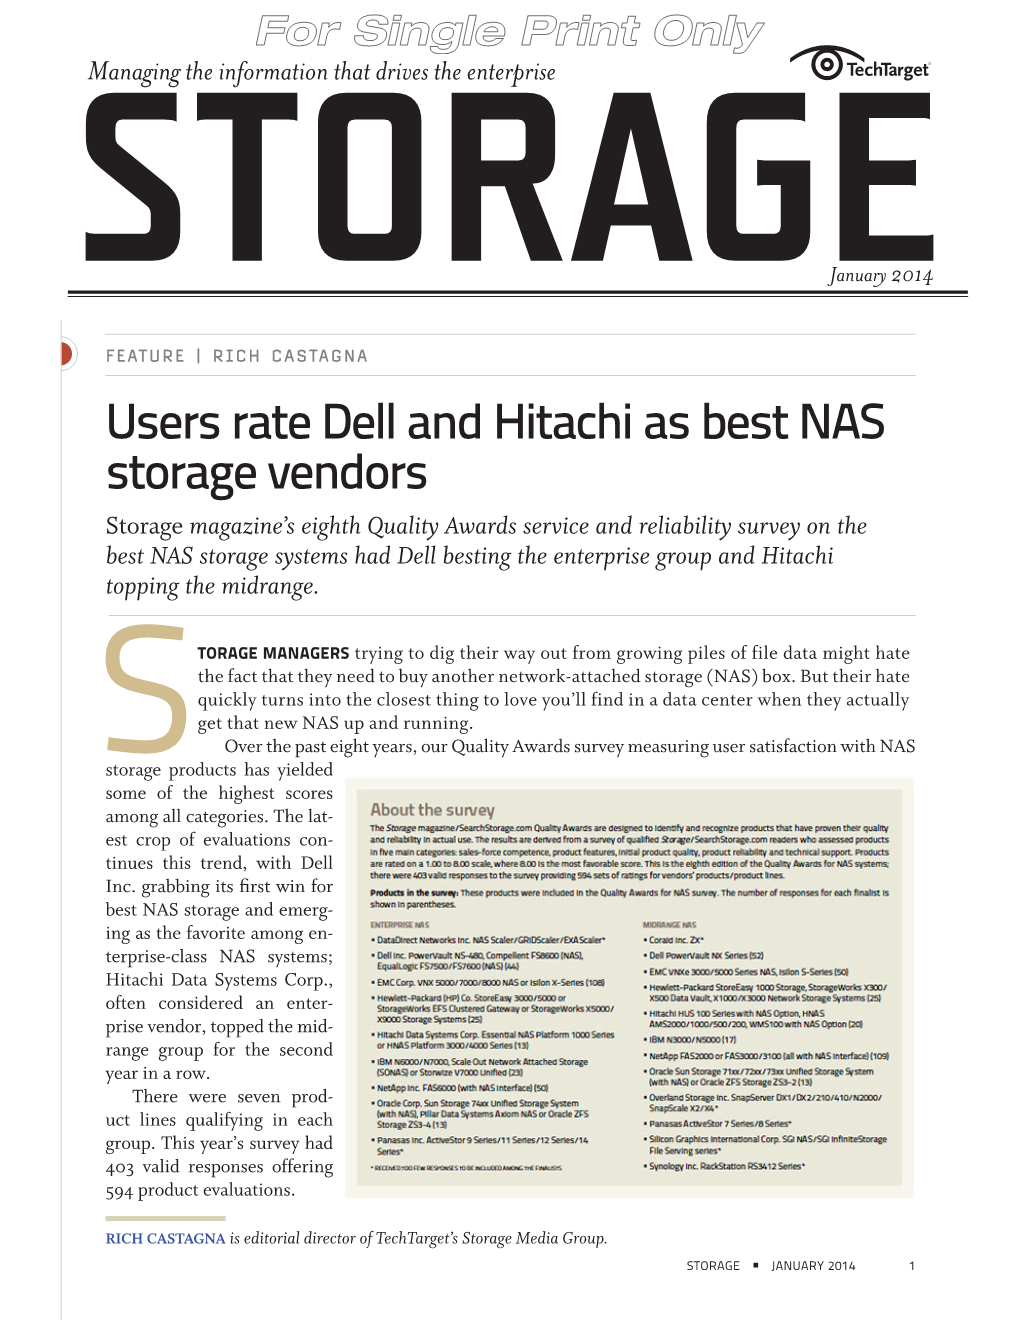 Users Rate Dell and Hitachi As Best NAS Storage Vendors